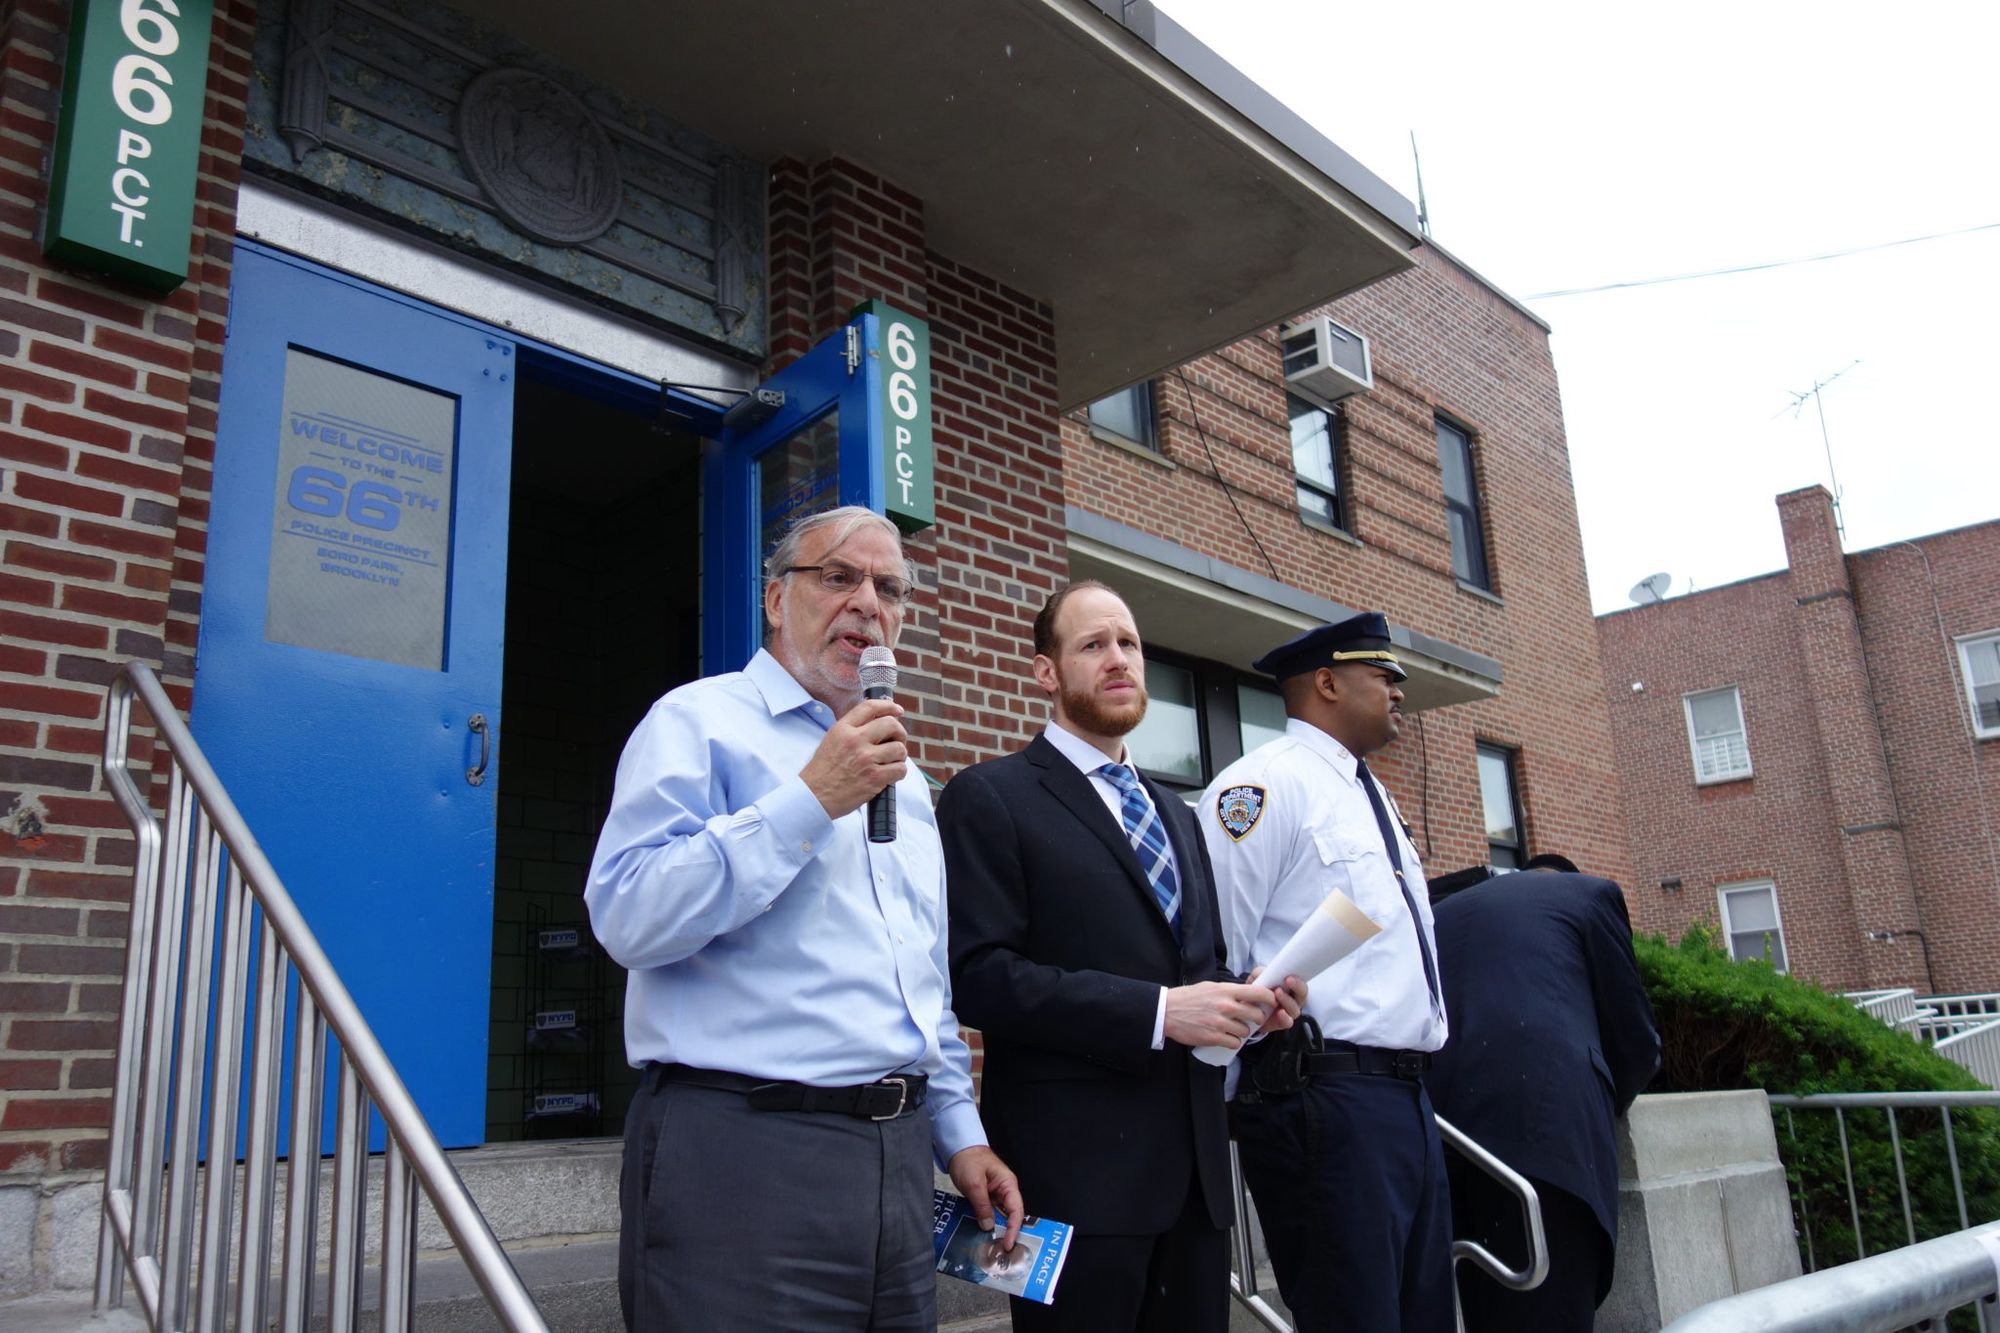 After Fatal Shooting Of Bronx Officer, Pols Hold Pro-Cop Rally In Boro Park